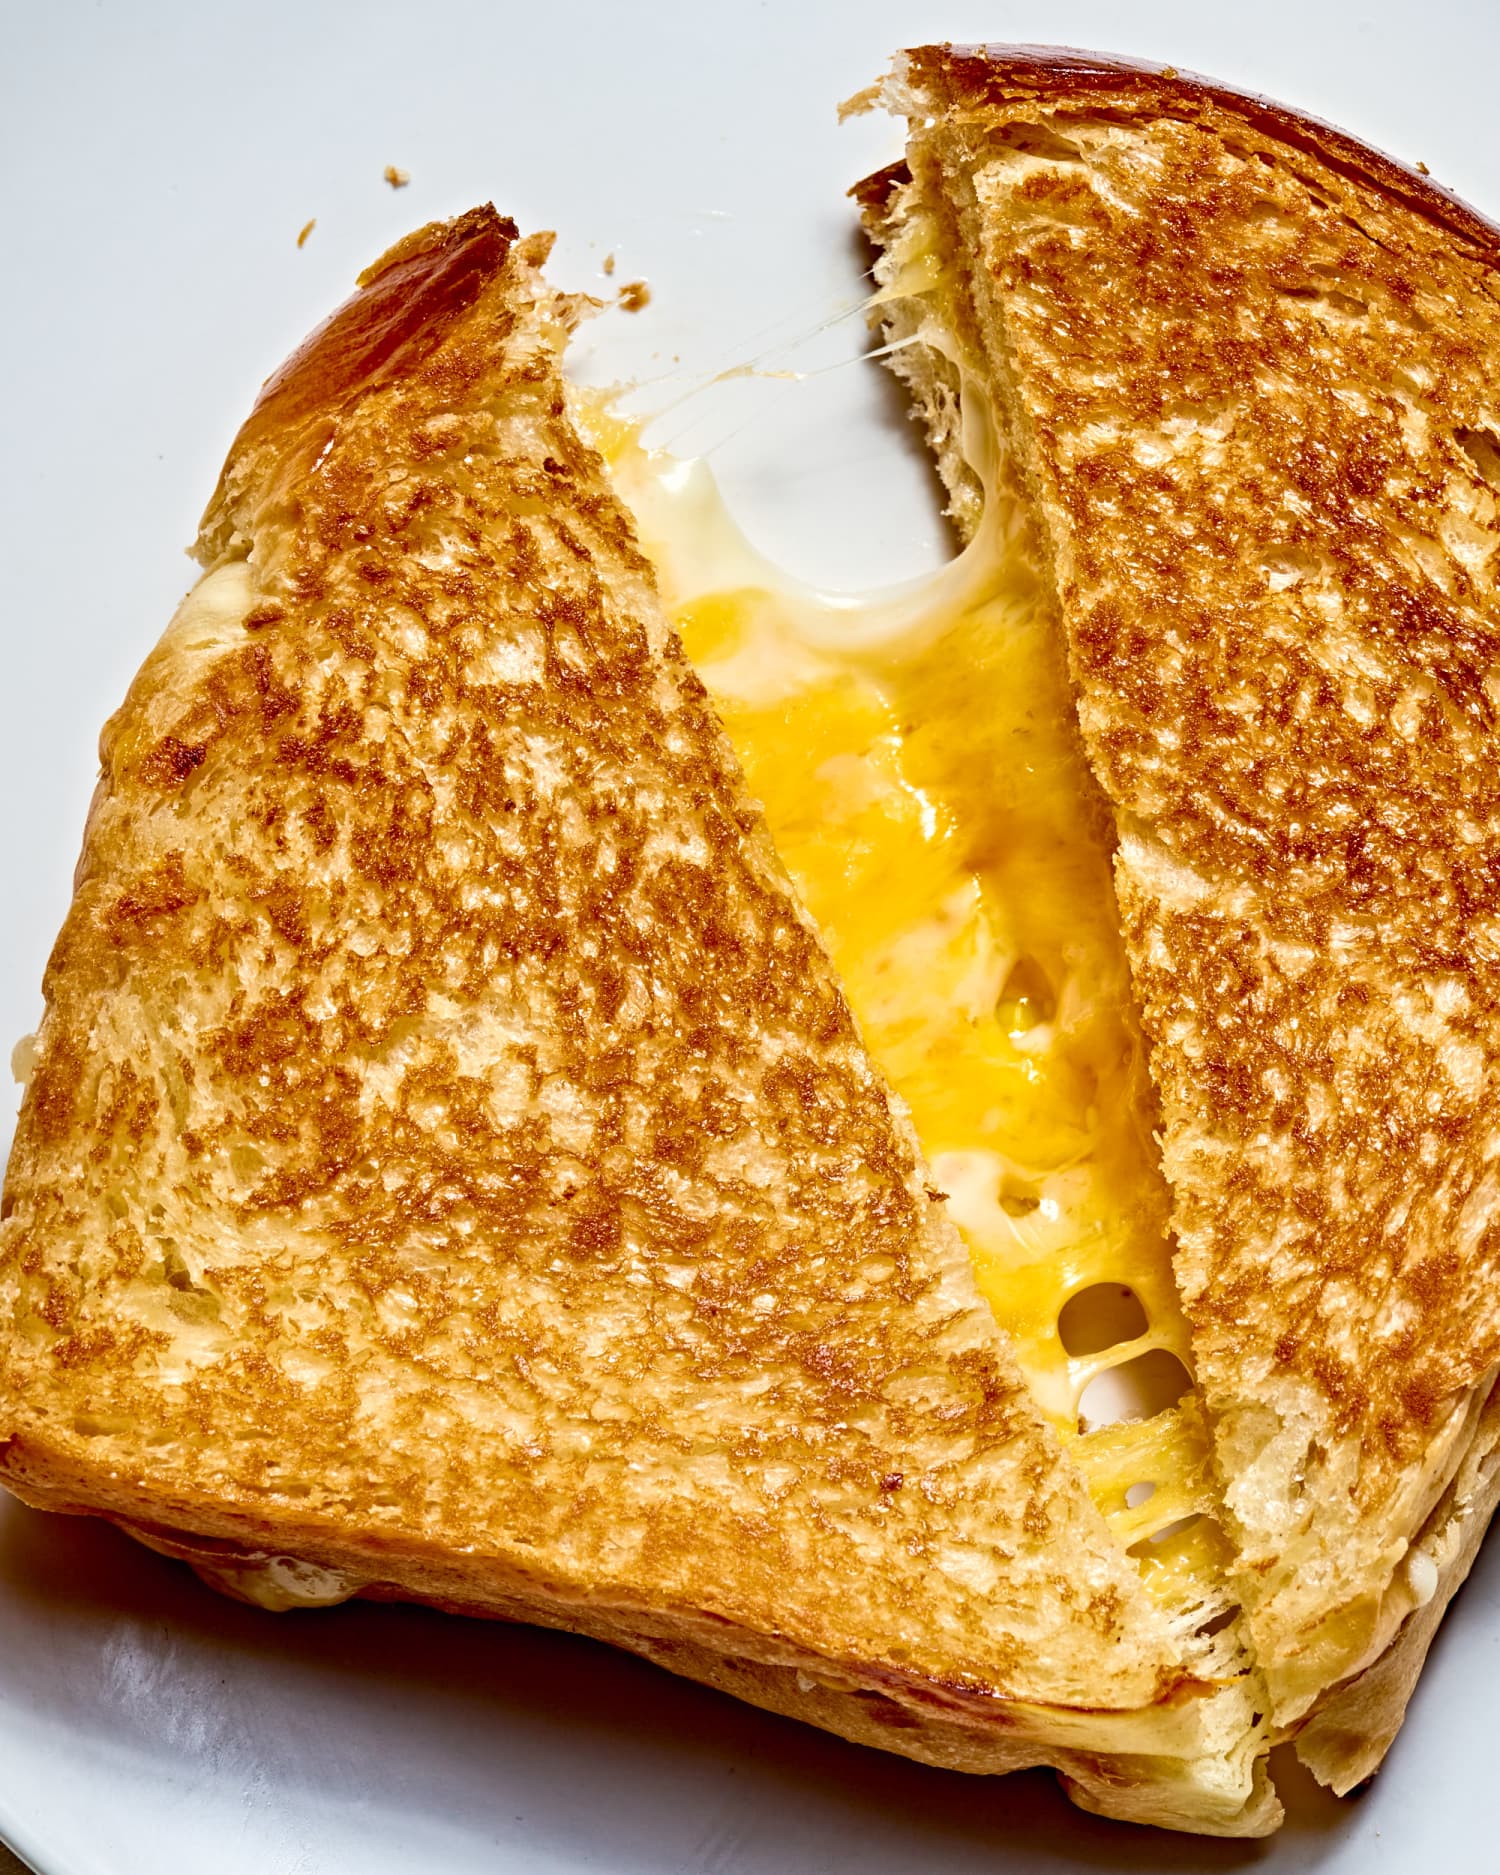 This Recipe Forever Changed the Way I Make Grilled Cheese